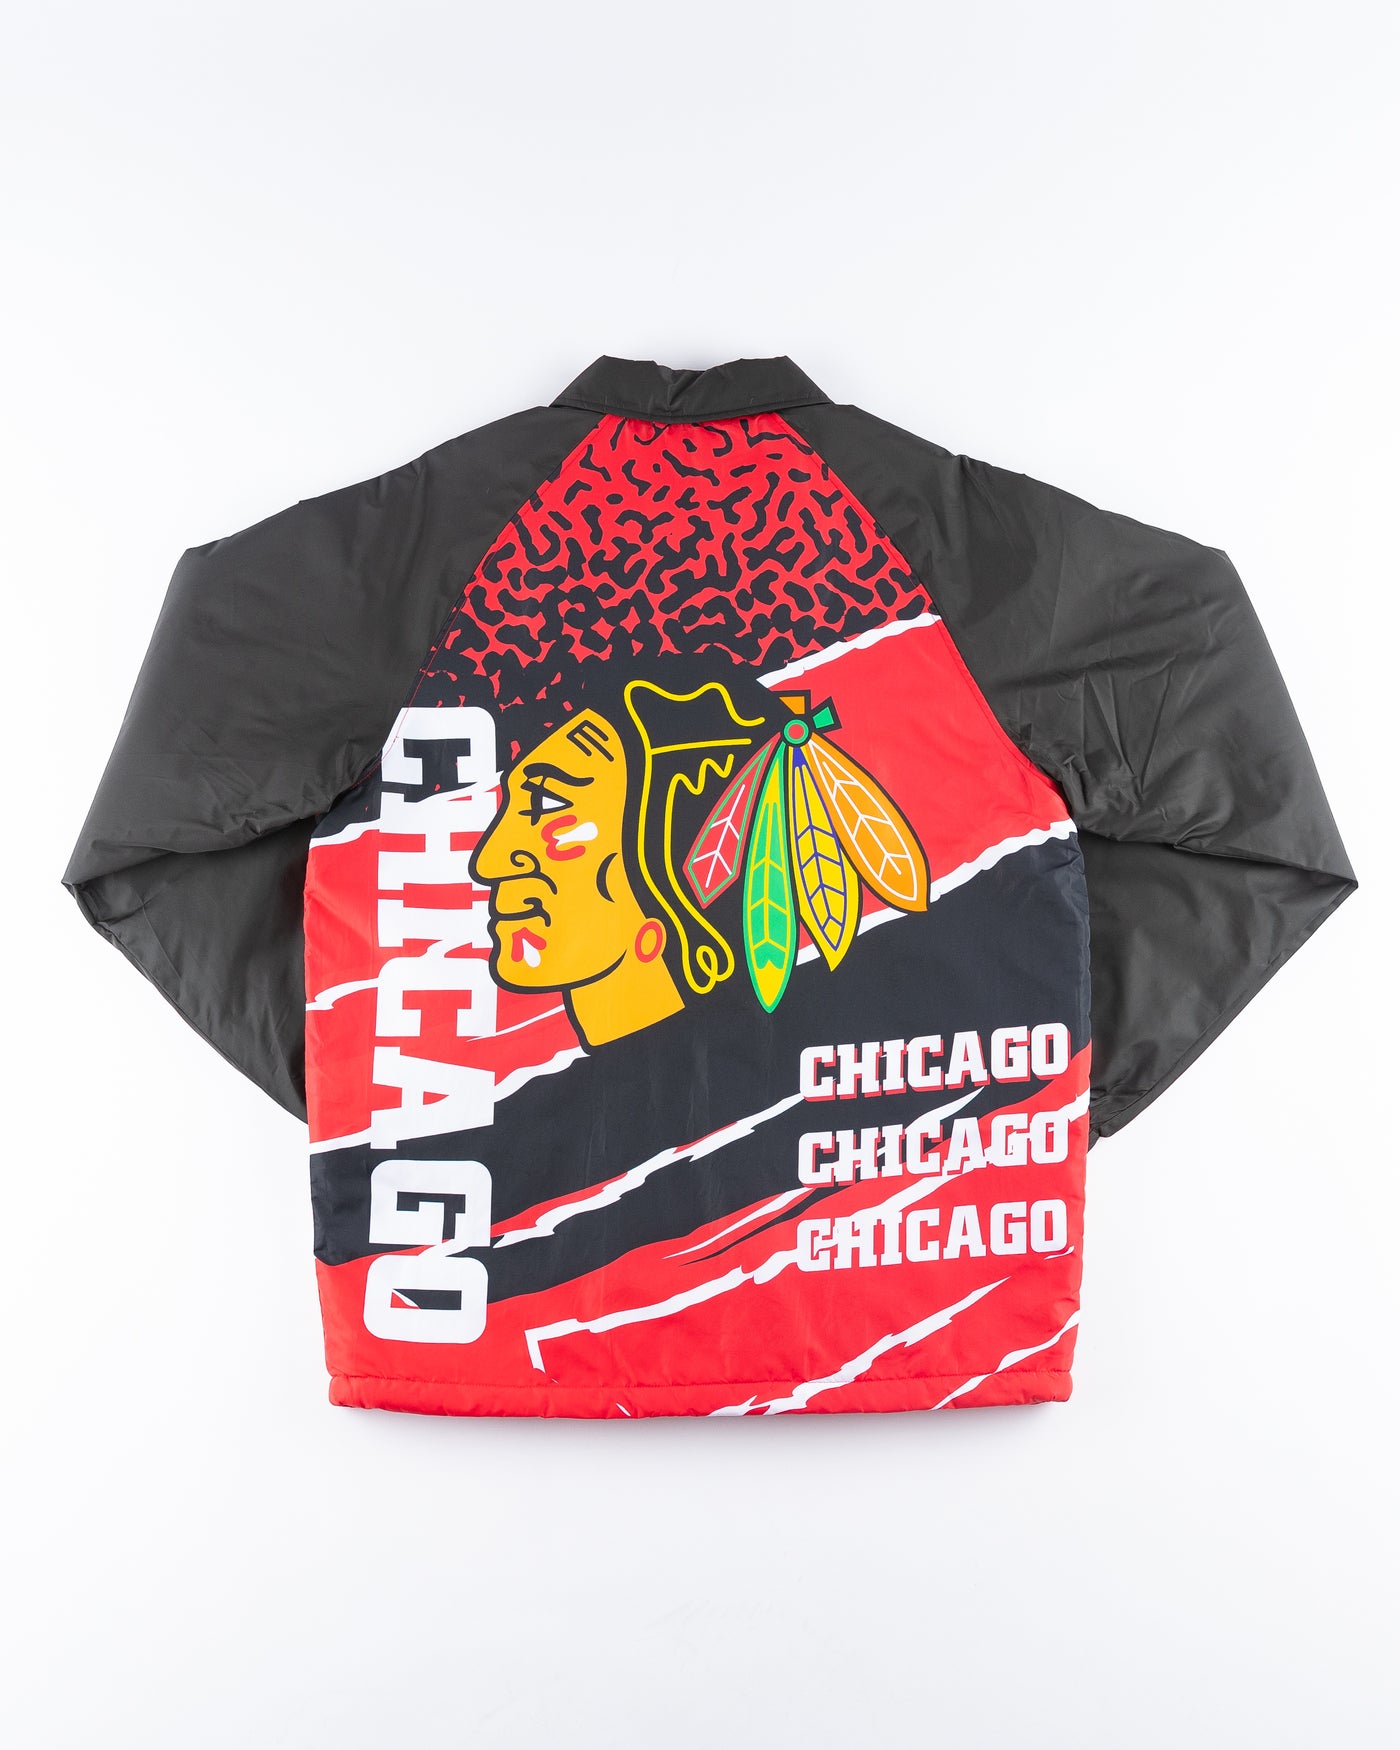 black and red New Era vintage coach inspired jacket with Chicago Blackhawks graphics on left chest and back - back lay flat